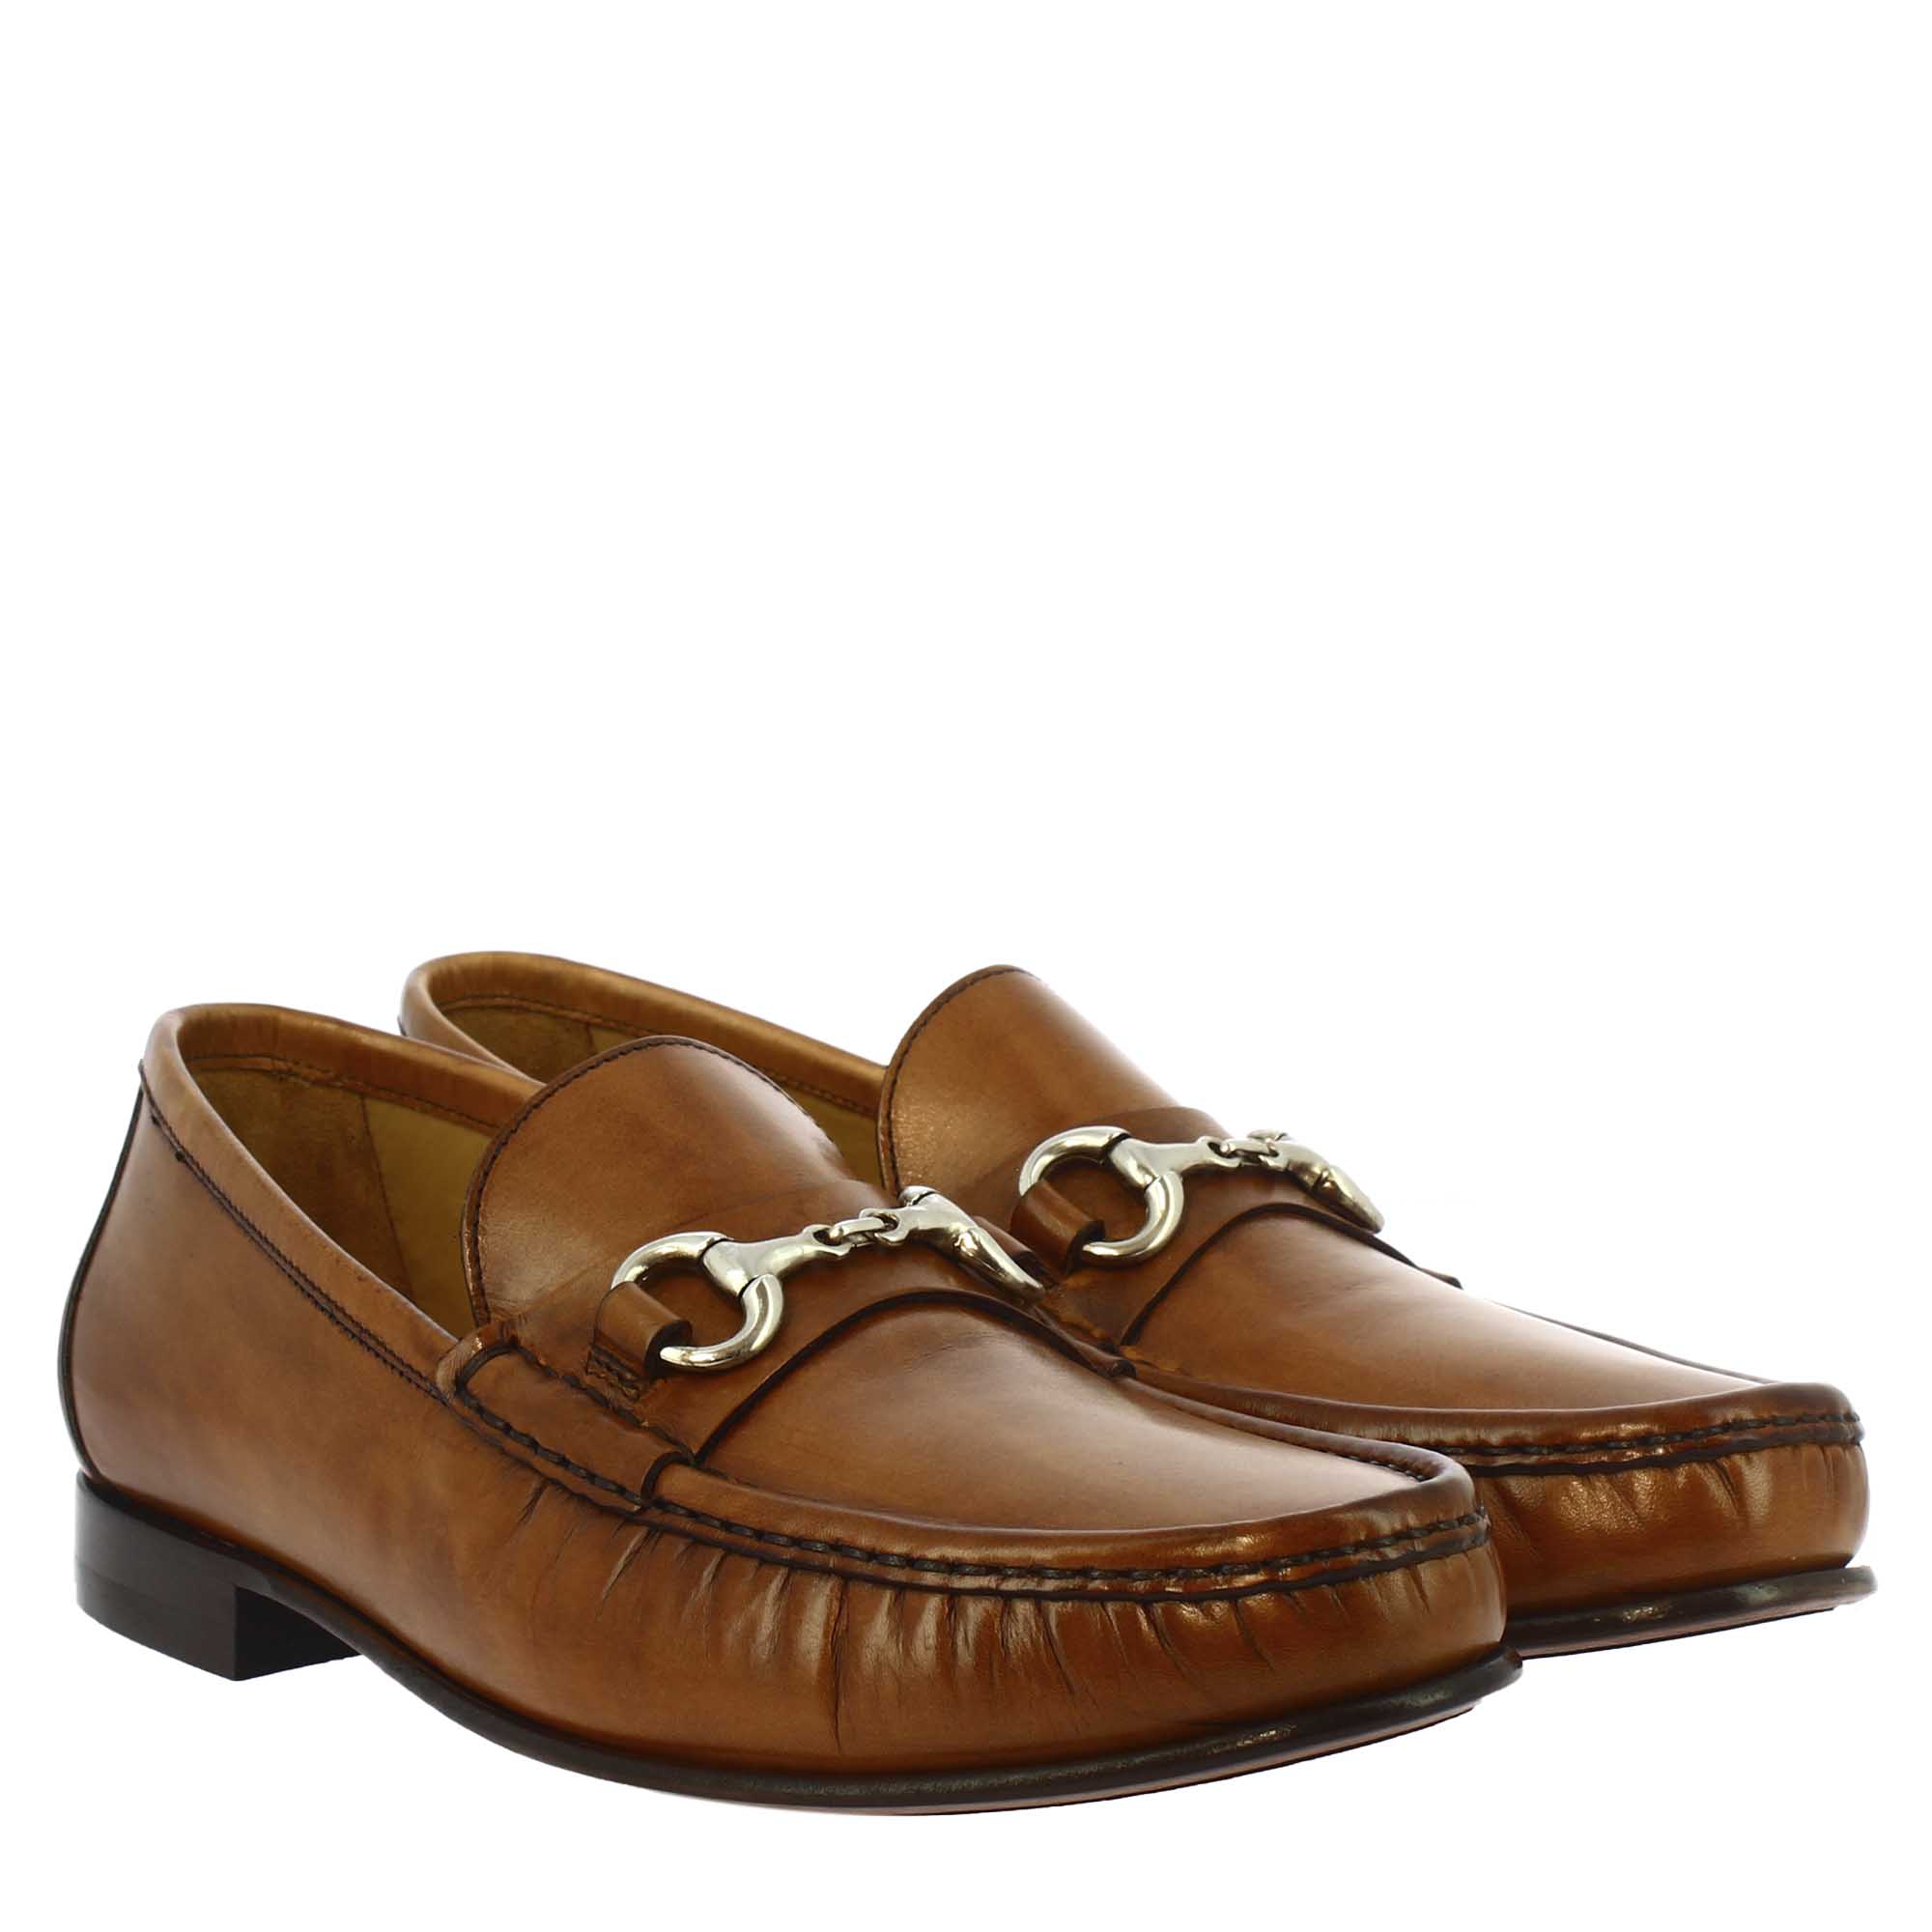 Handmade men's loafers in brown calf LEATHER